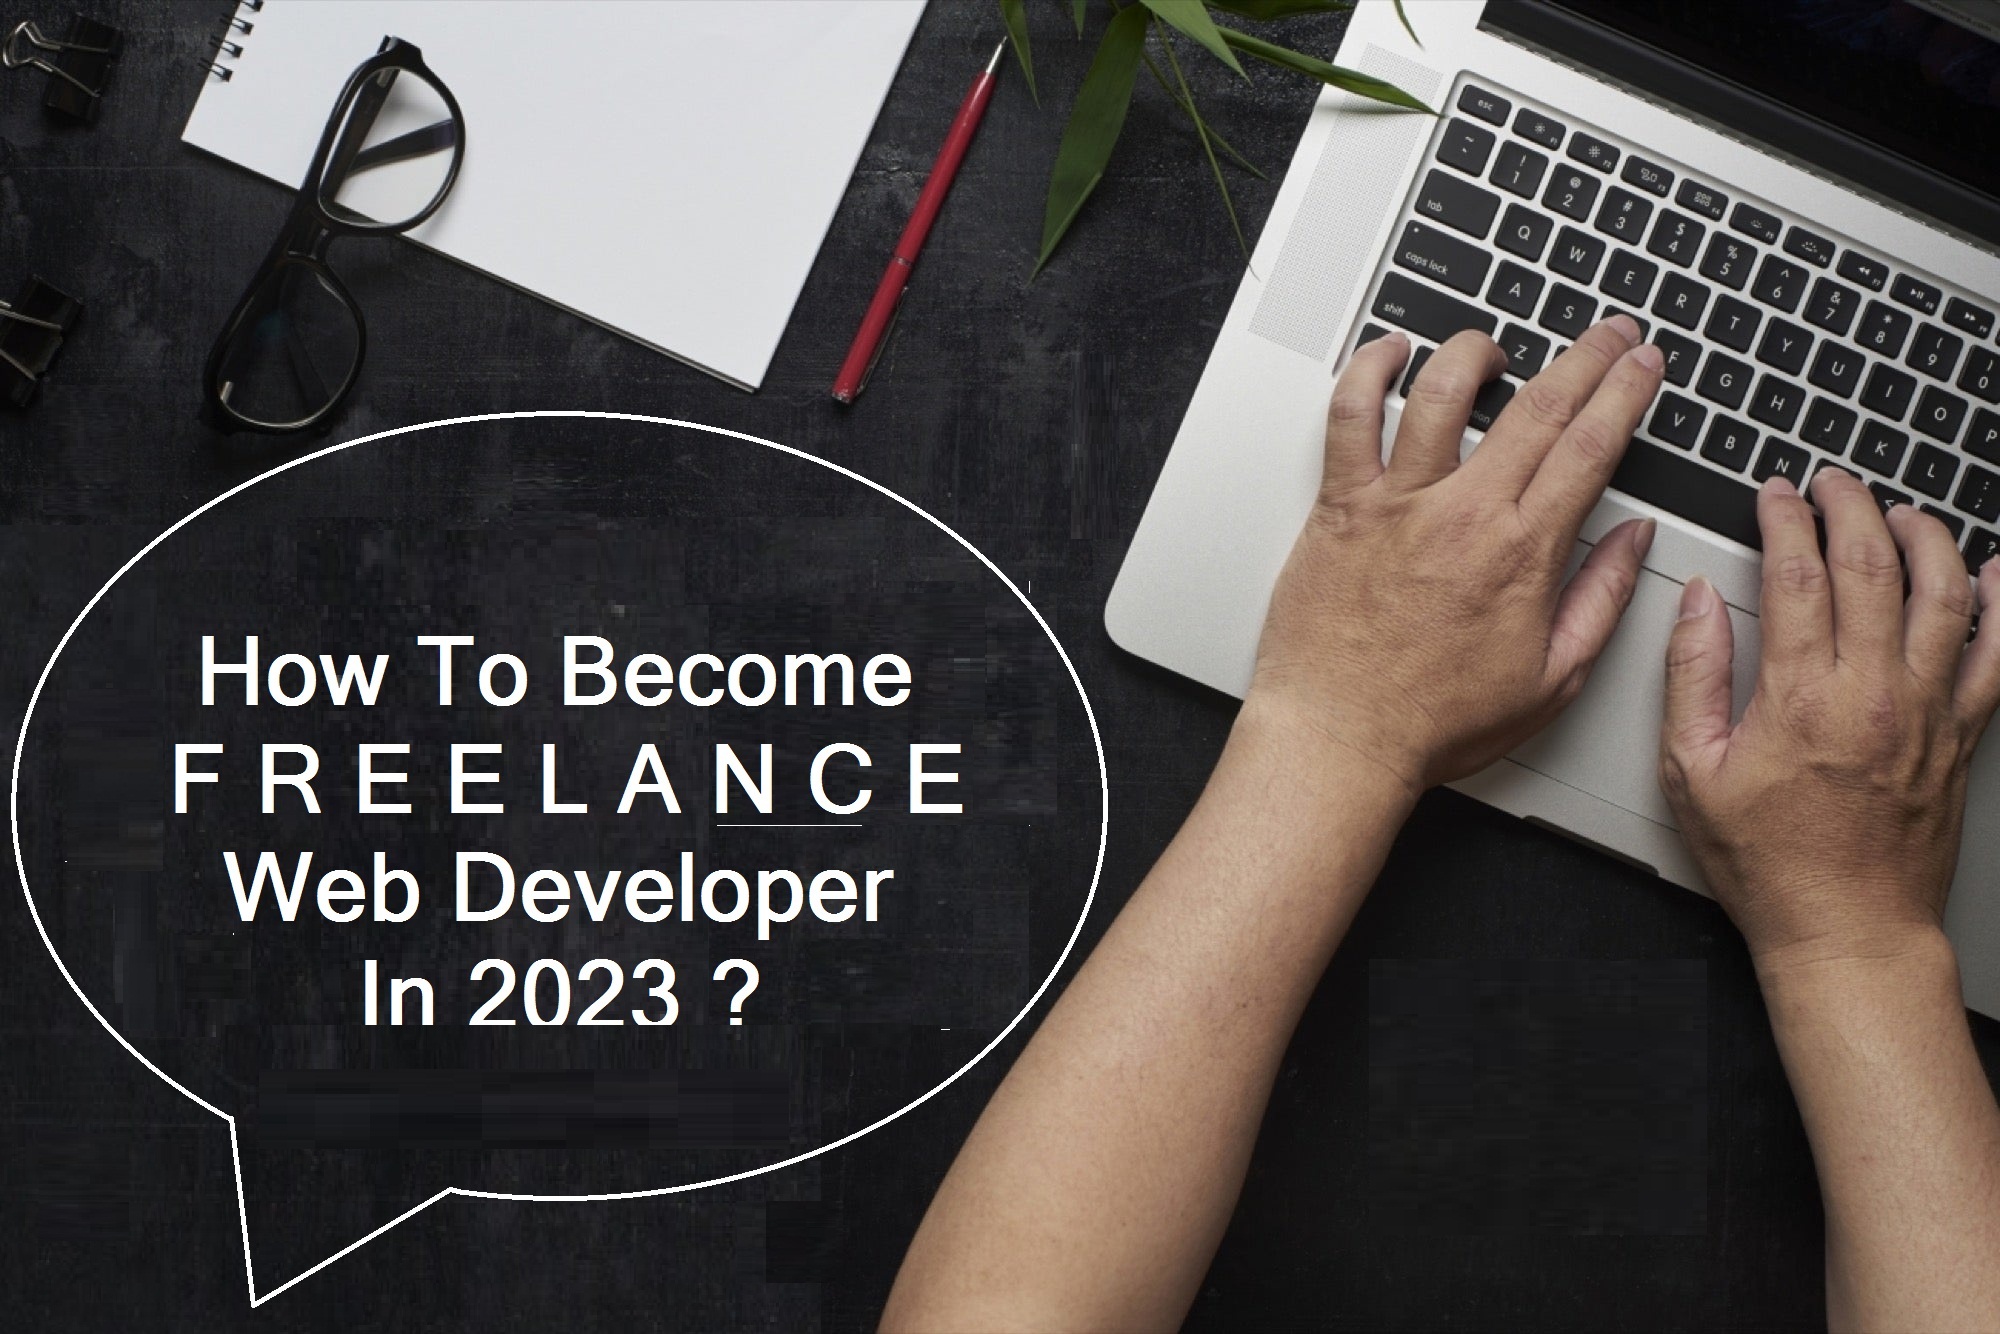 How to become freelance web developer